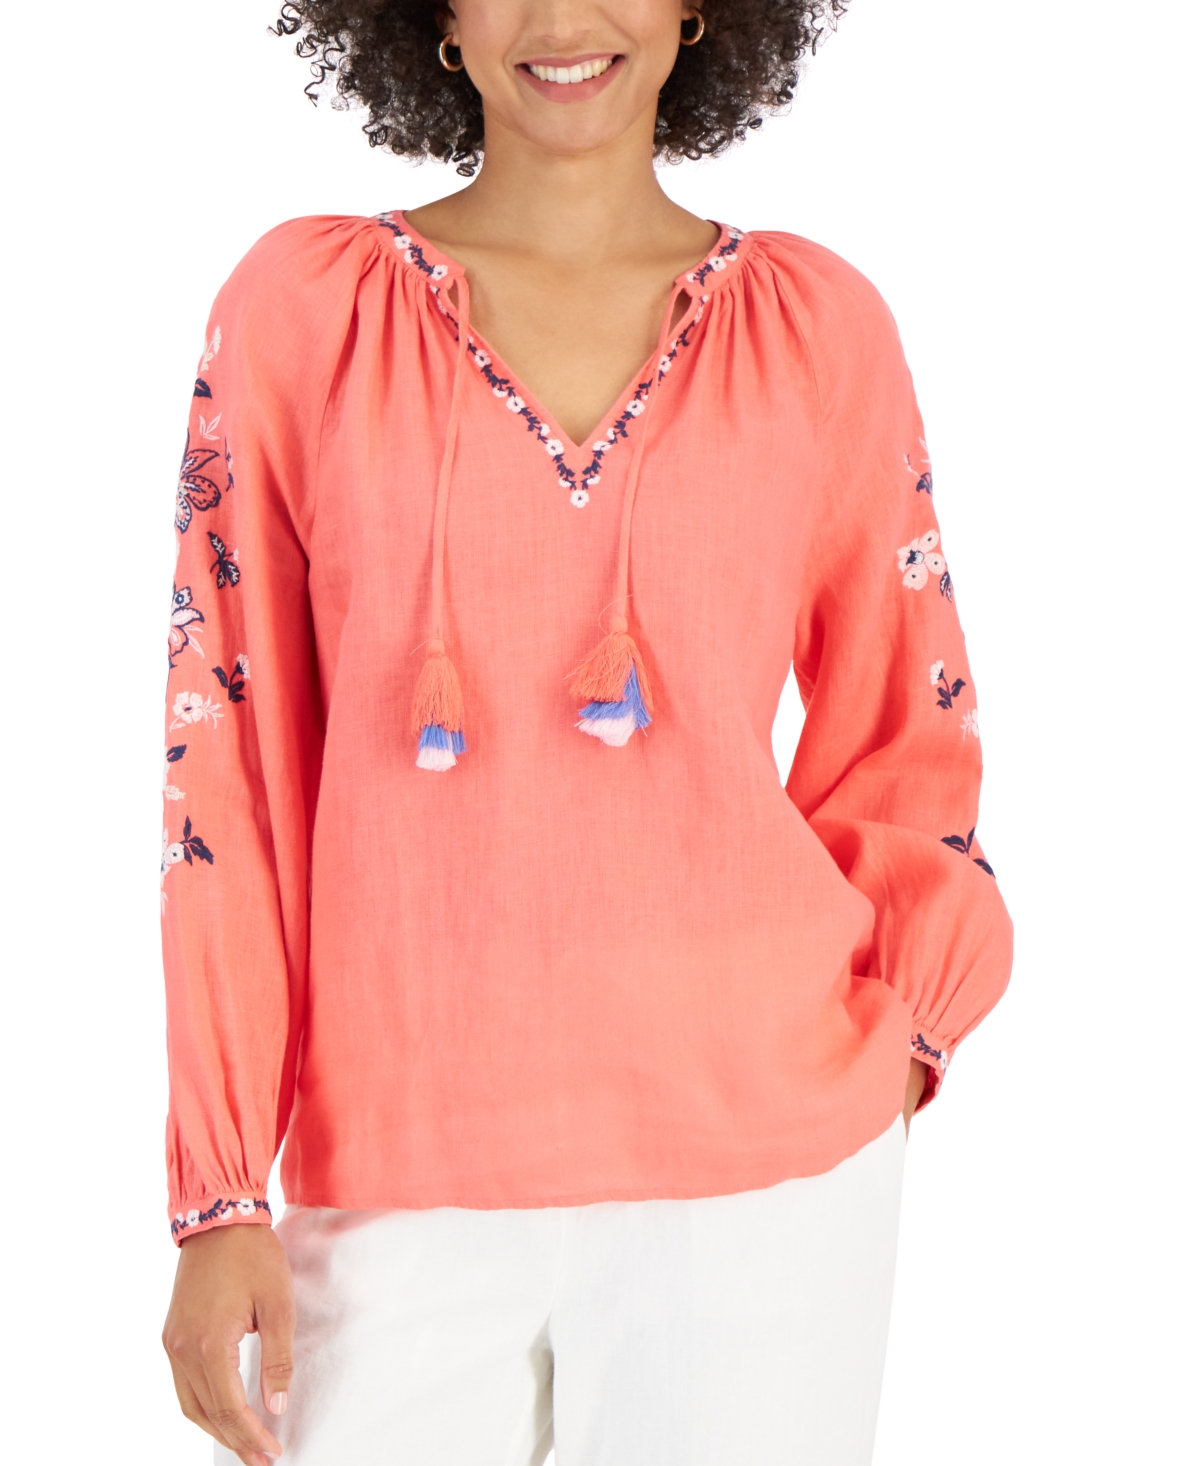 Charter Club Women's Linen Embroidered Peasant Top, Created for Macy's